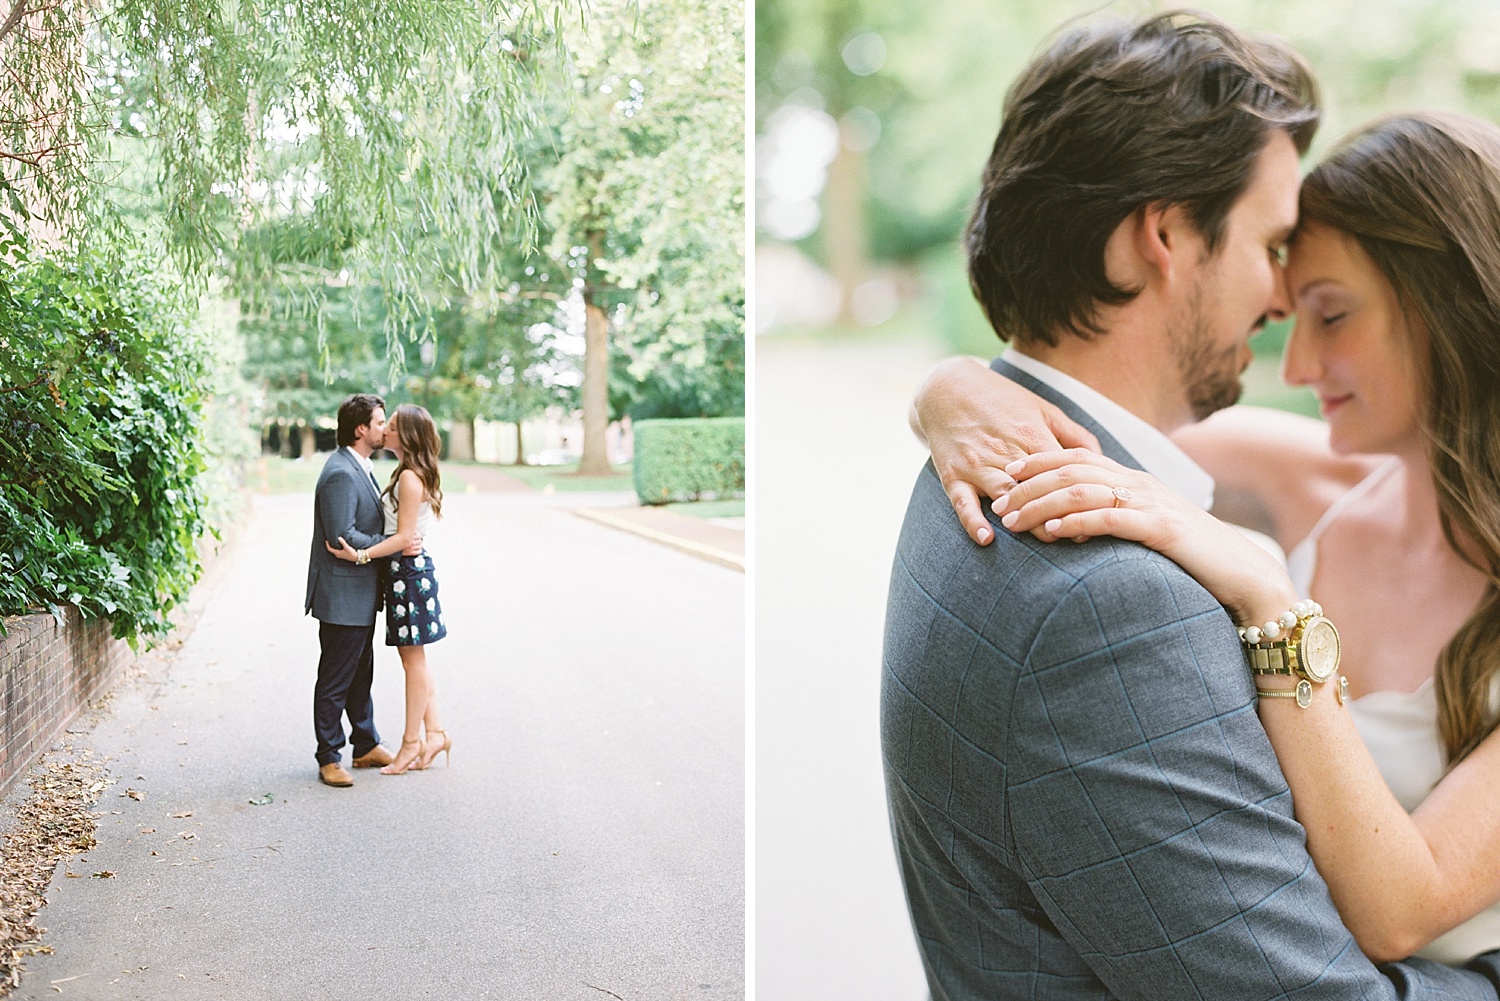 Downtown Lexington Engagement Session Talon Winery Picnic Engagement Session Gal Meets Glam Anthropologie Dress Laura Bodnar Photography Lexington Wedding Photographer Film Photography_0007-1.jpg